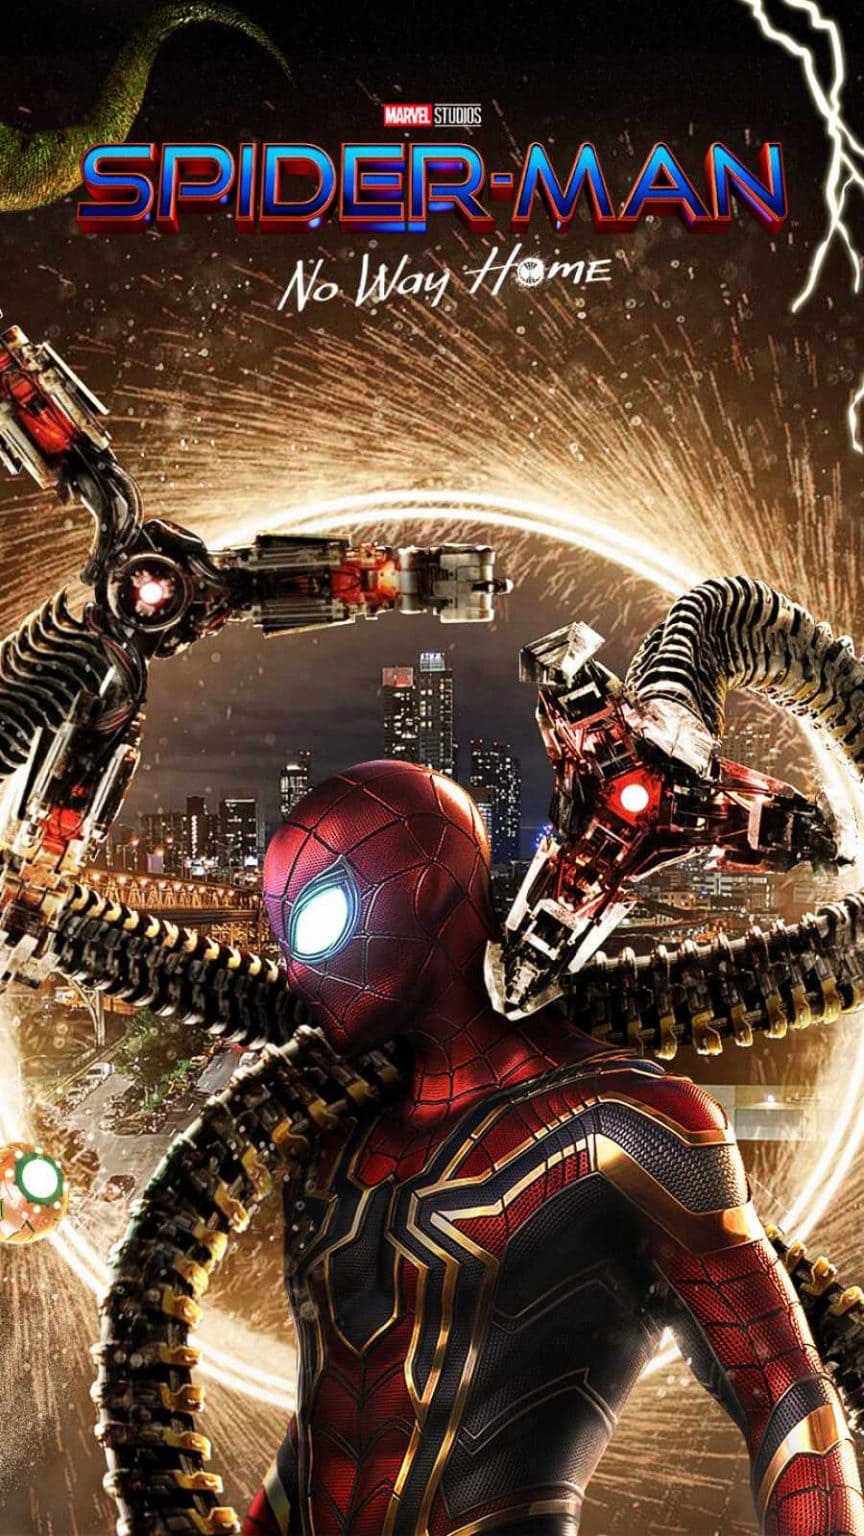 iphone 13 pro max wallpaper Spider Man Far From Home 13 pro max Wallpaper, iPhone 12 Background, iPhone Wallpaper, iPhone background., WallpaperUpdate, Best iPhone Wallpaper and iPhone background